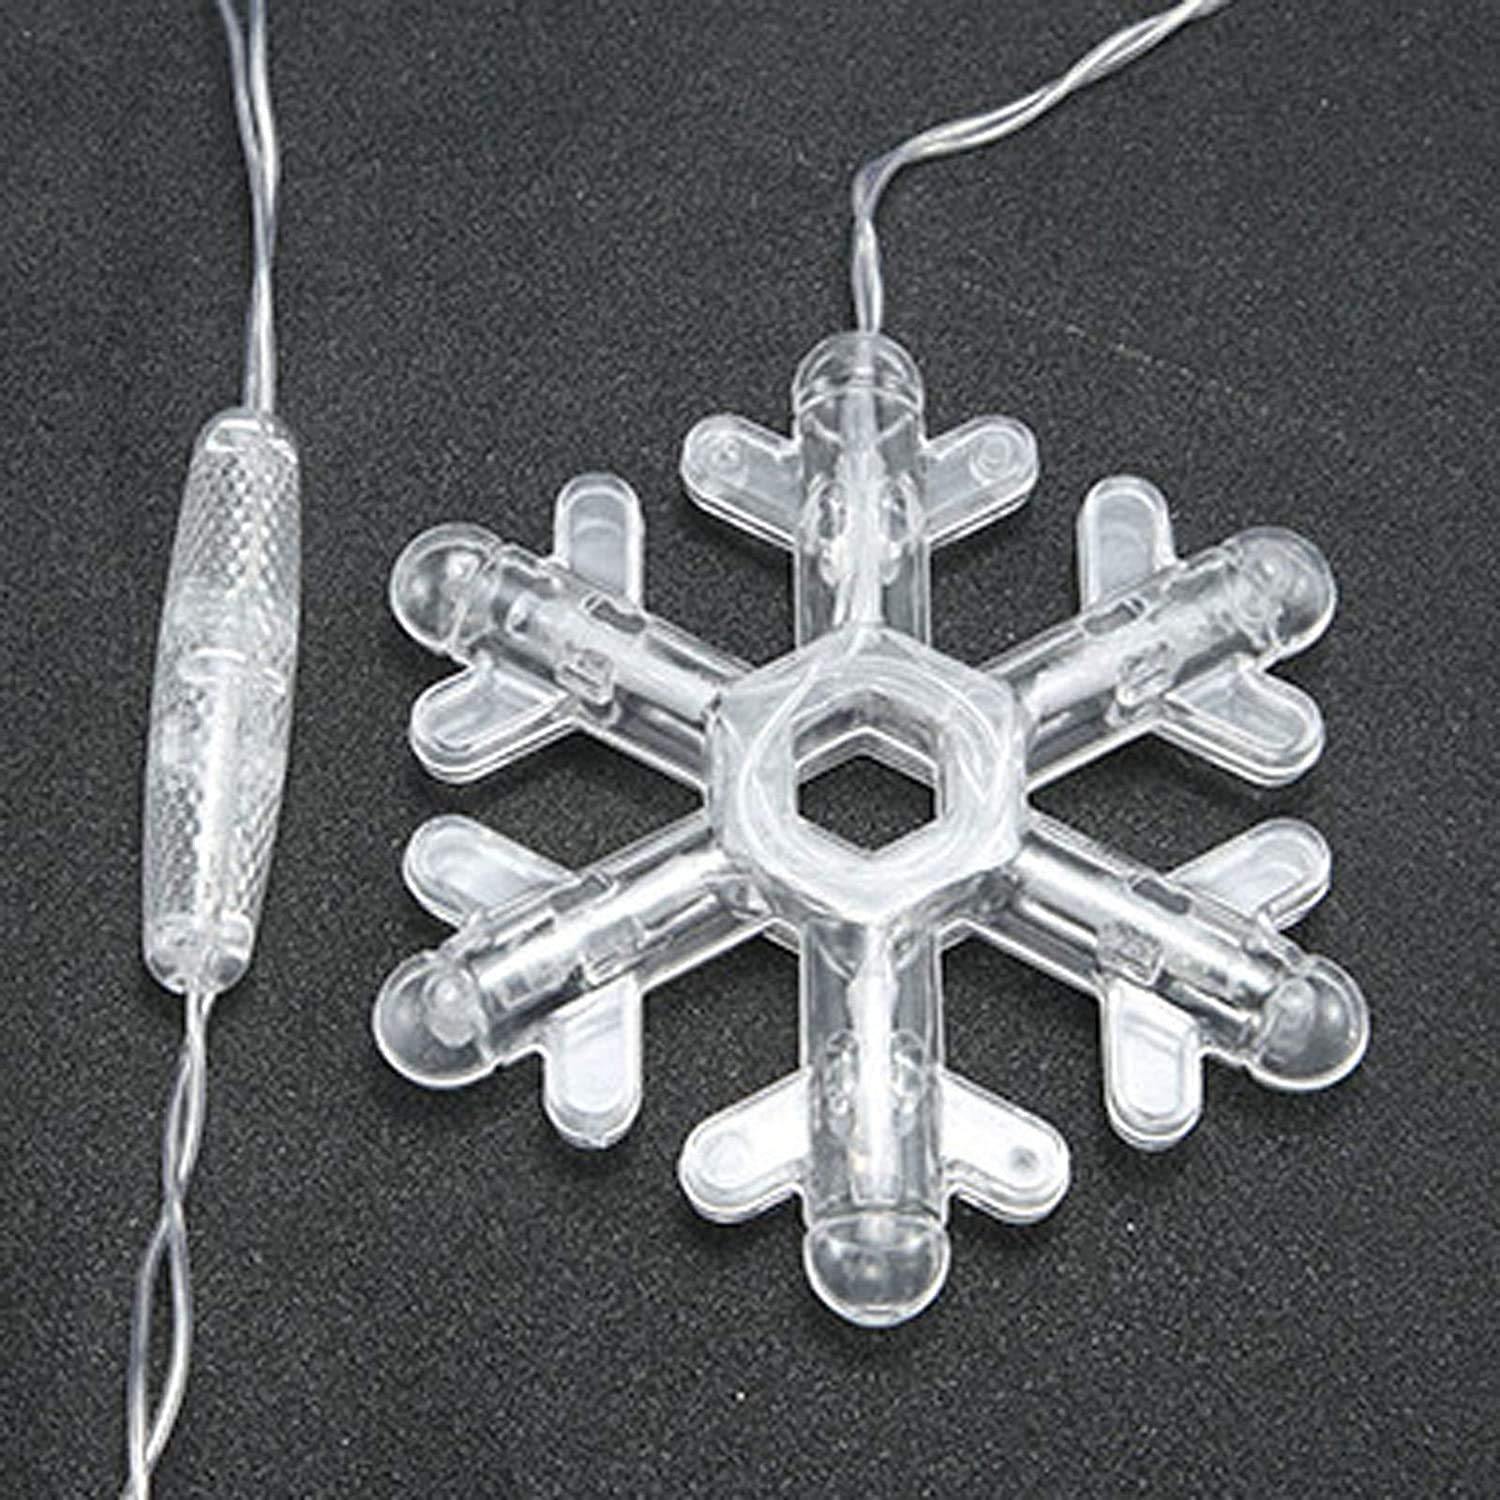 Snowflake LED Curtain String Light ( 16 snowflakes ) - WestNest.in